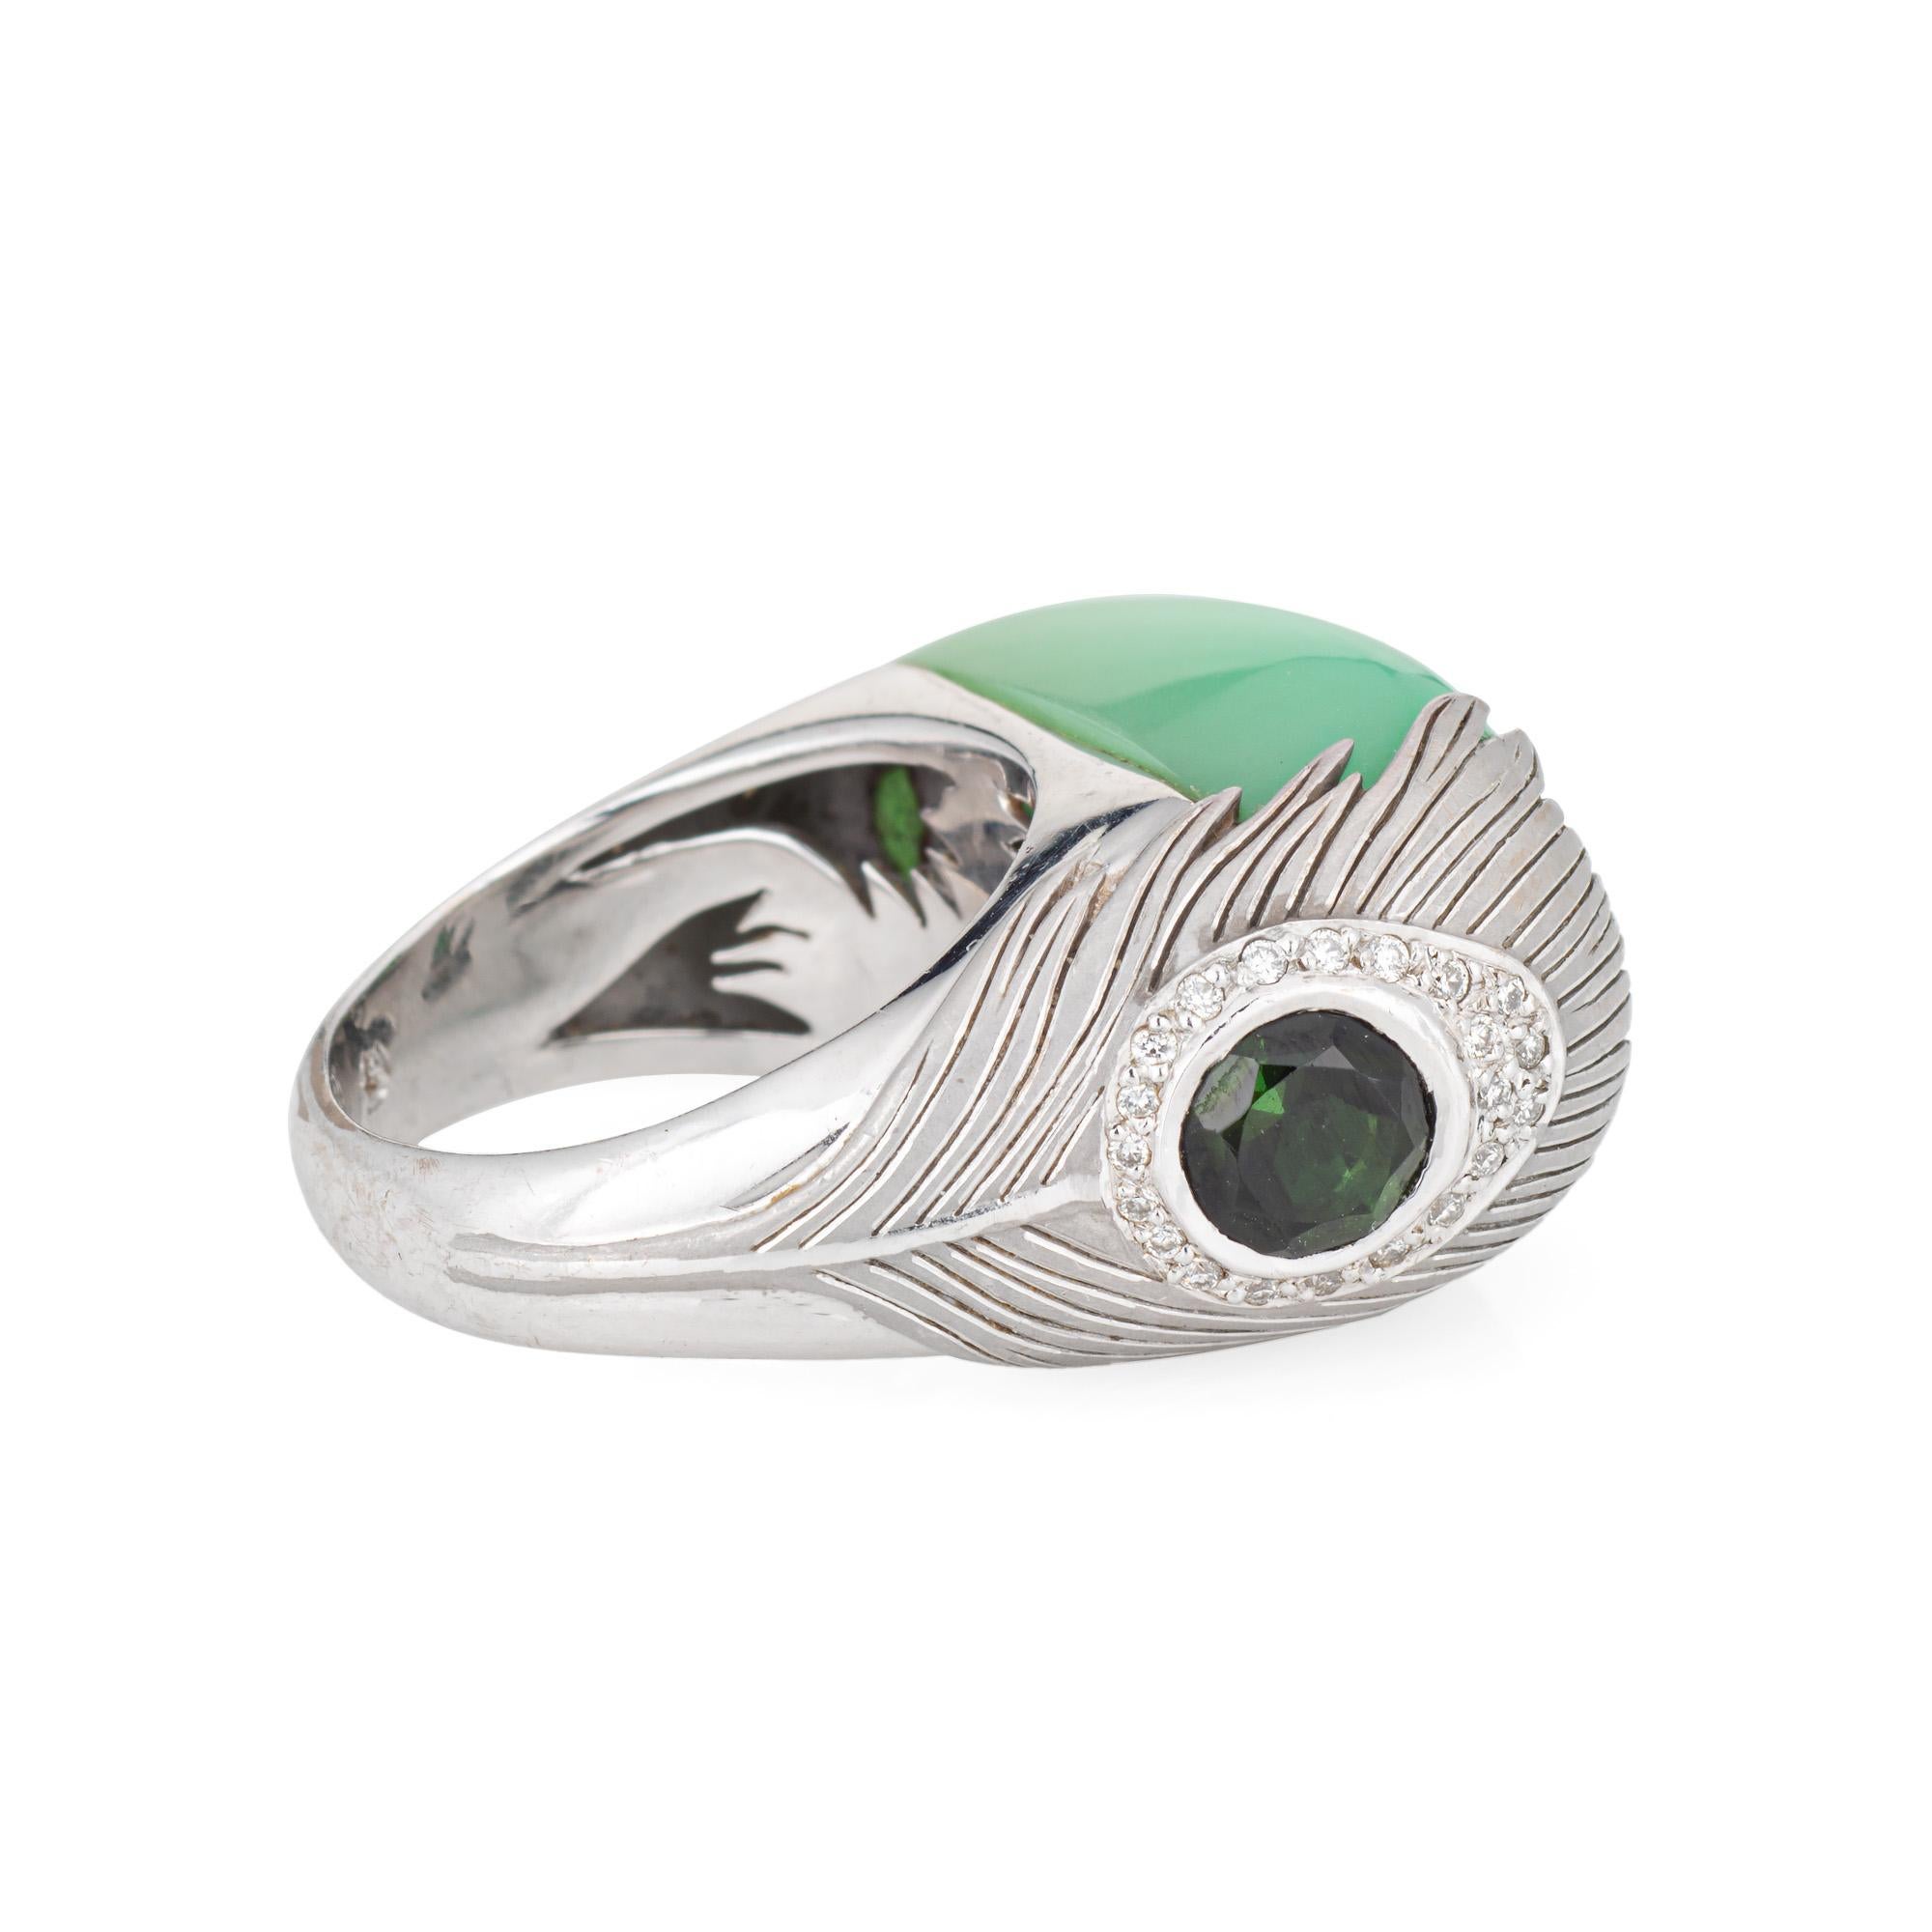 Estate Carrera y Carrera diamond peacock feather ring in 18 karat white gold.  

Round brilliant cut diamonds total an estimated 0.10 carats (estimated at H-I color and VS2-SI1 clarity). Tsavorite garnet measures 5.5mm. Green chalcedony measures